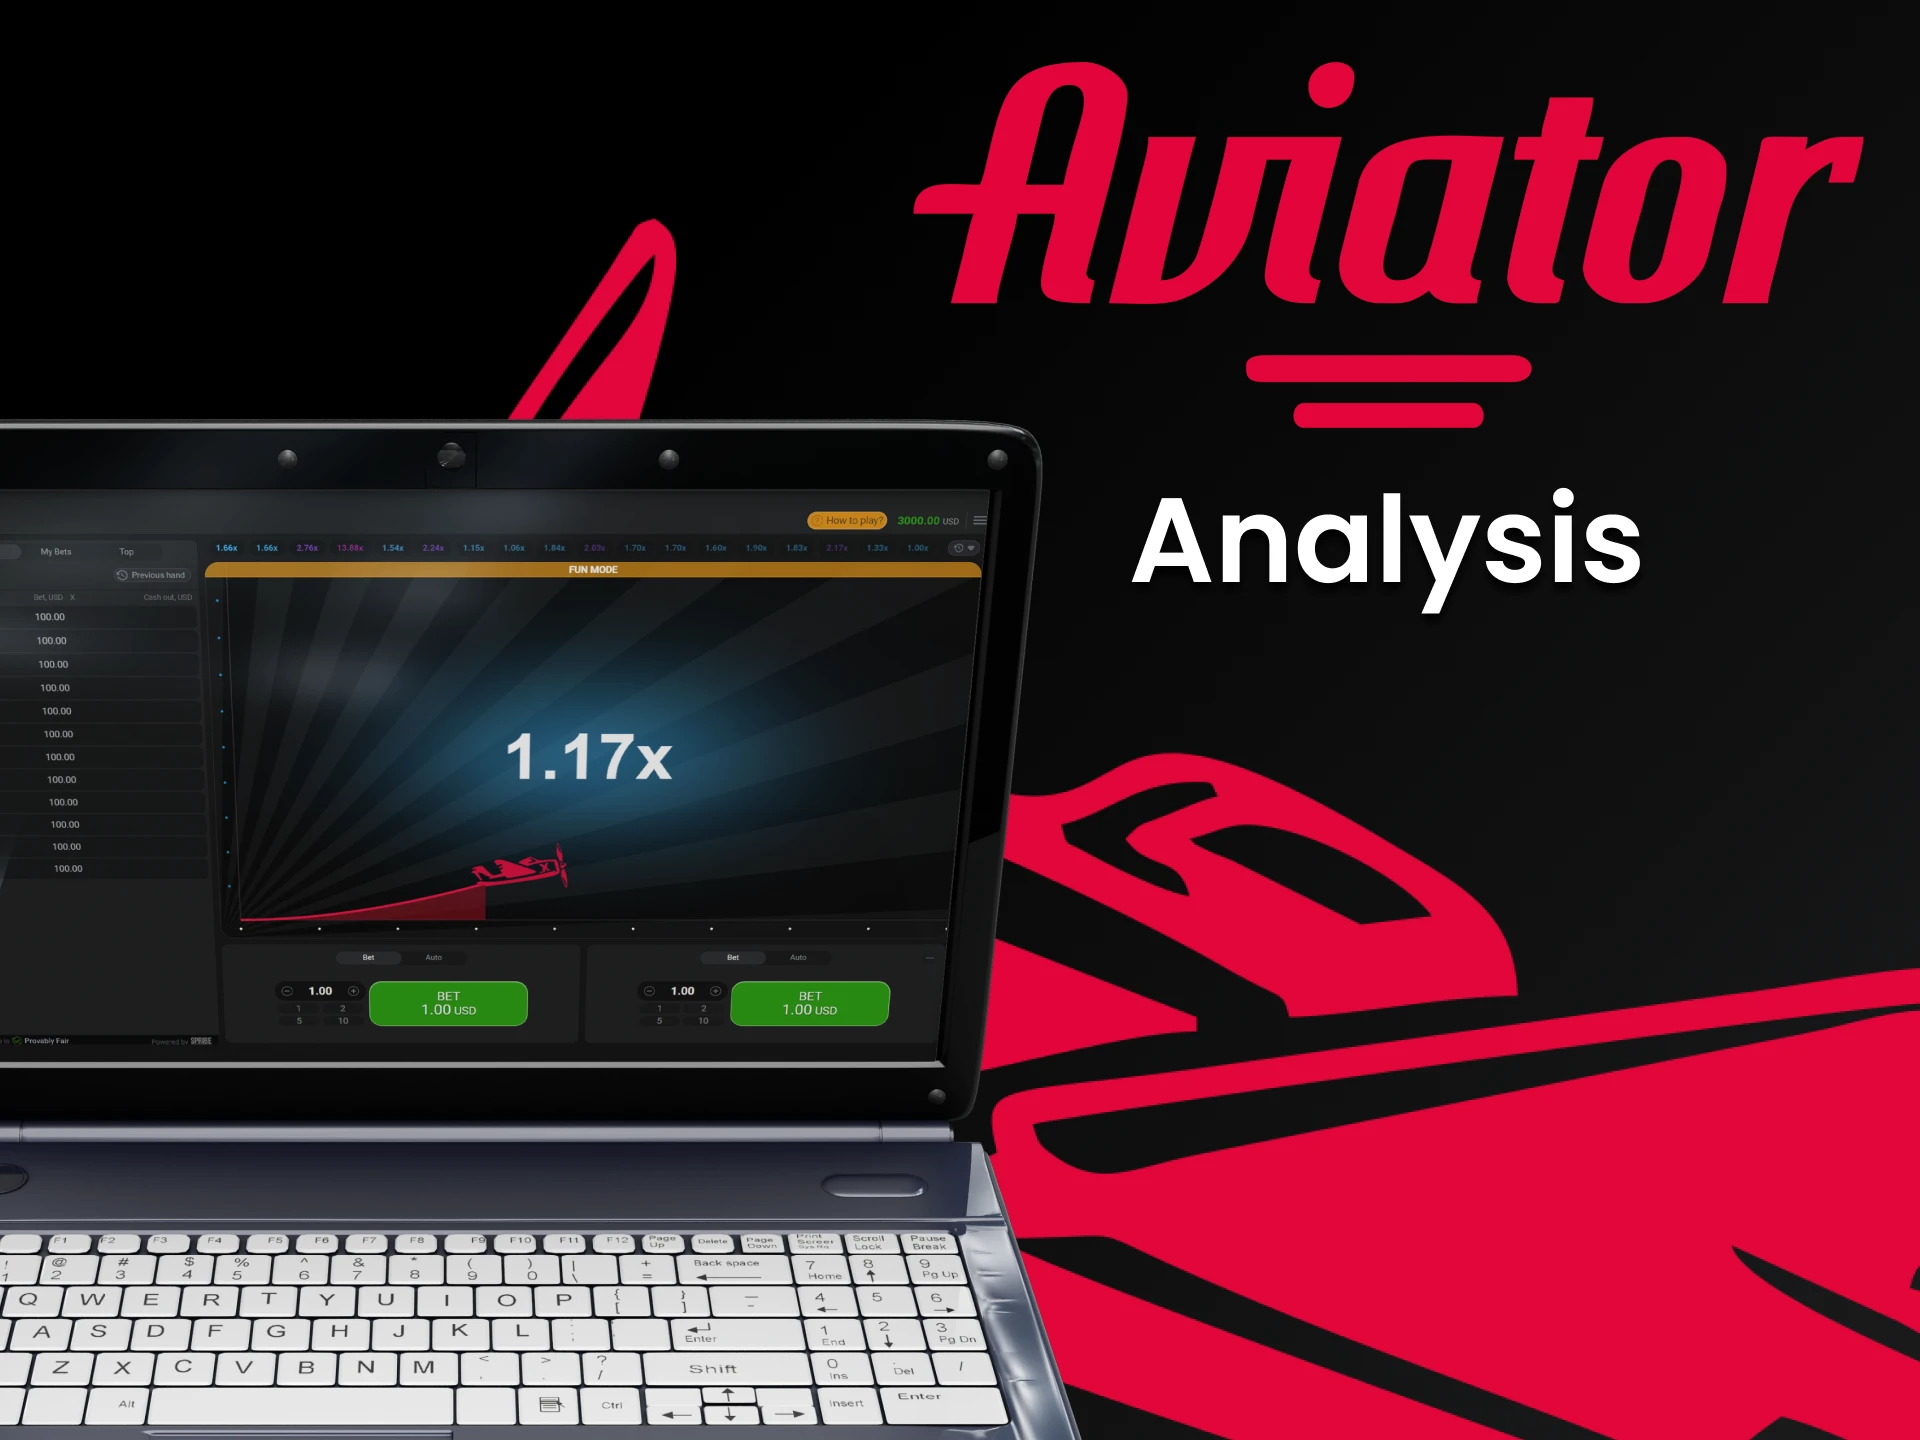 We will talk about the analysis for the game Aviator.